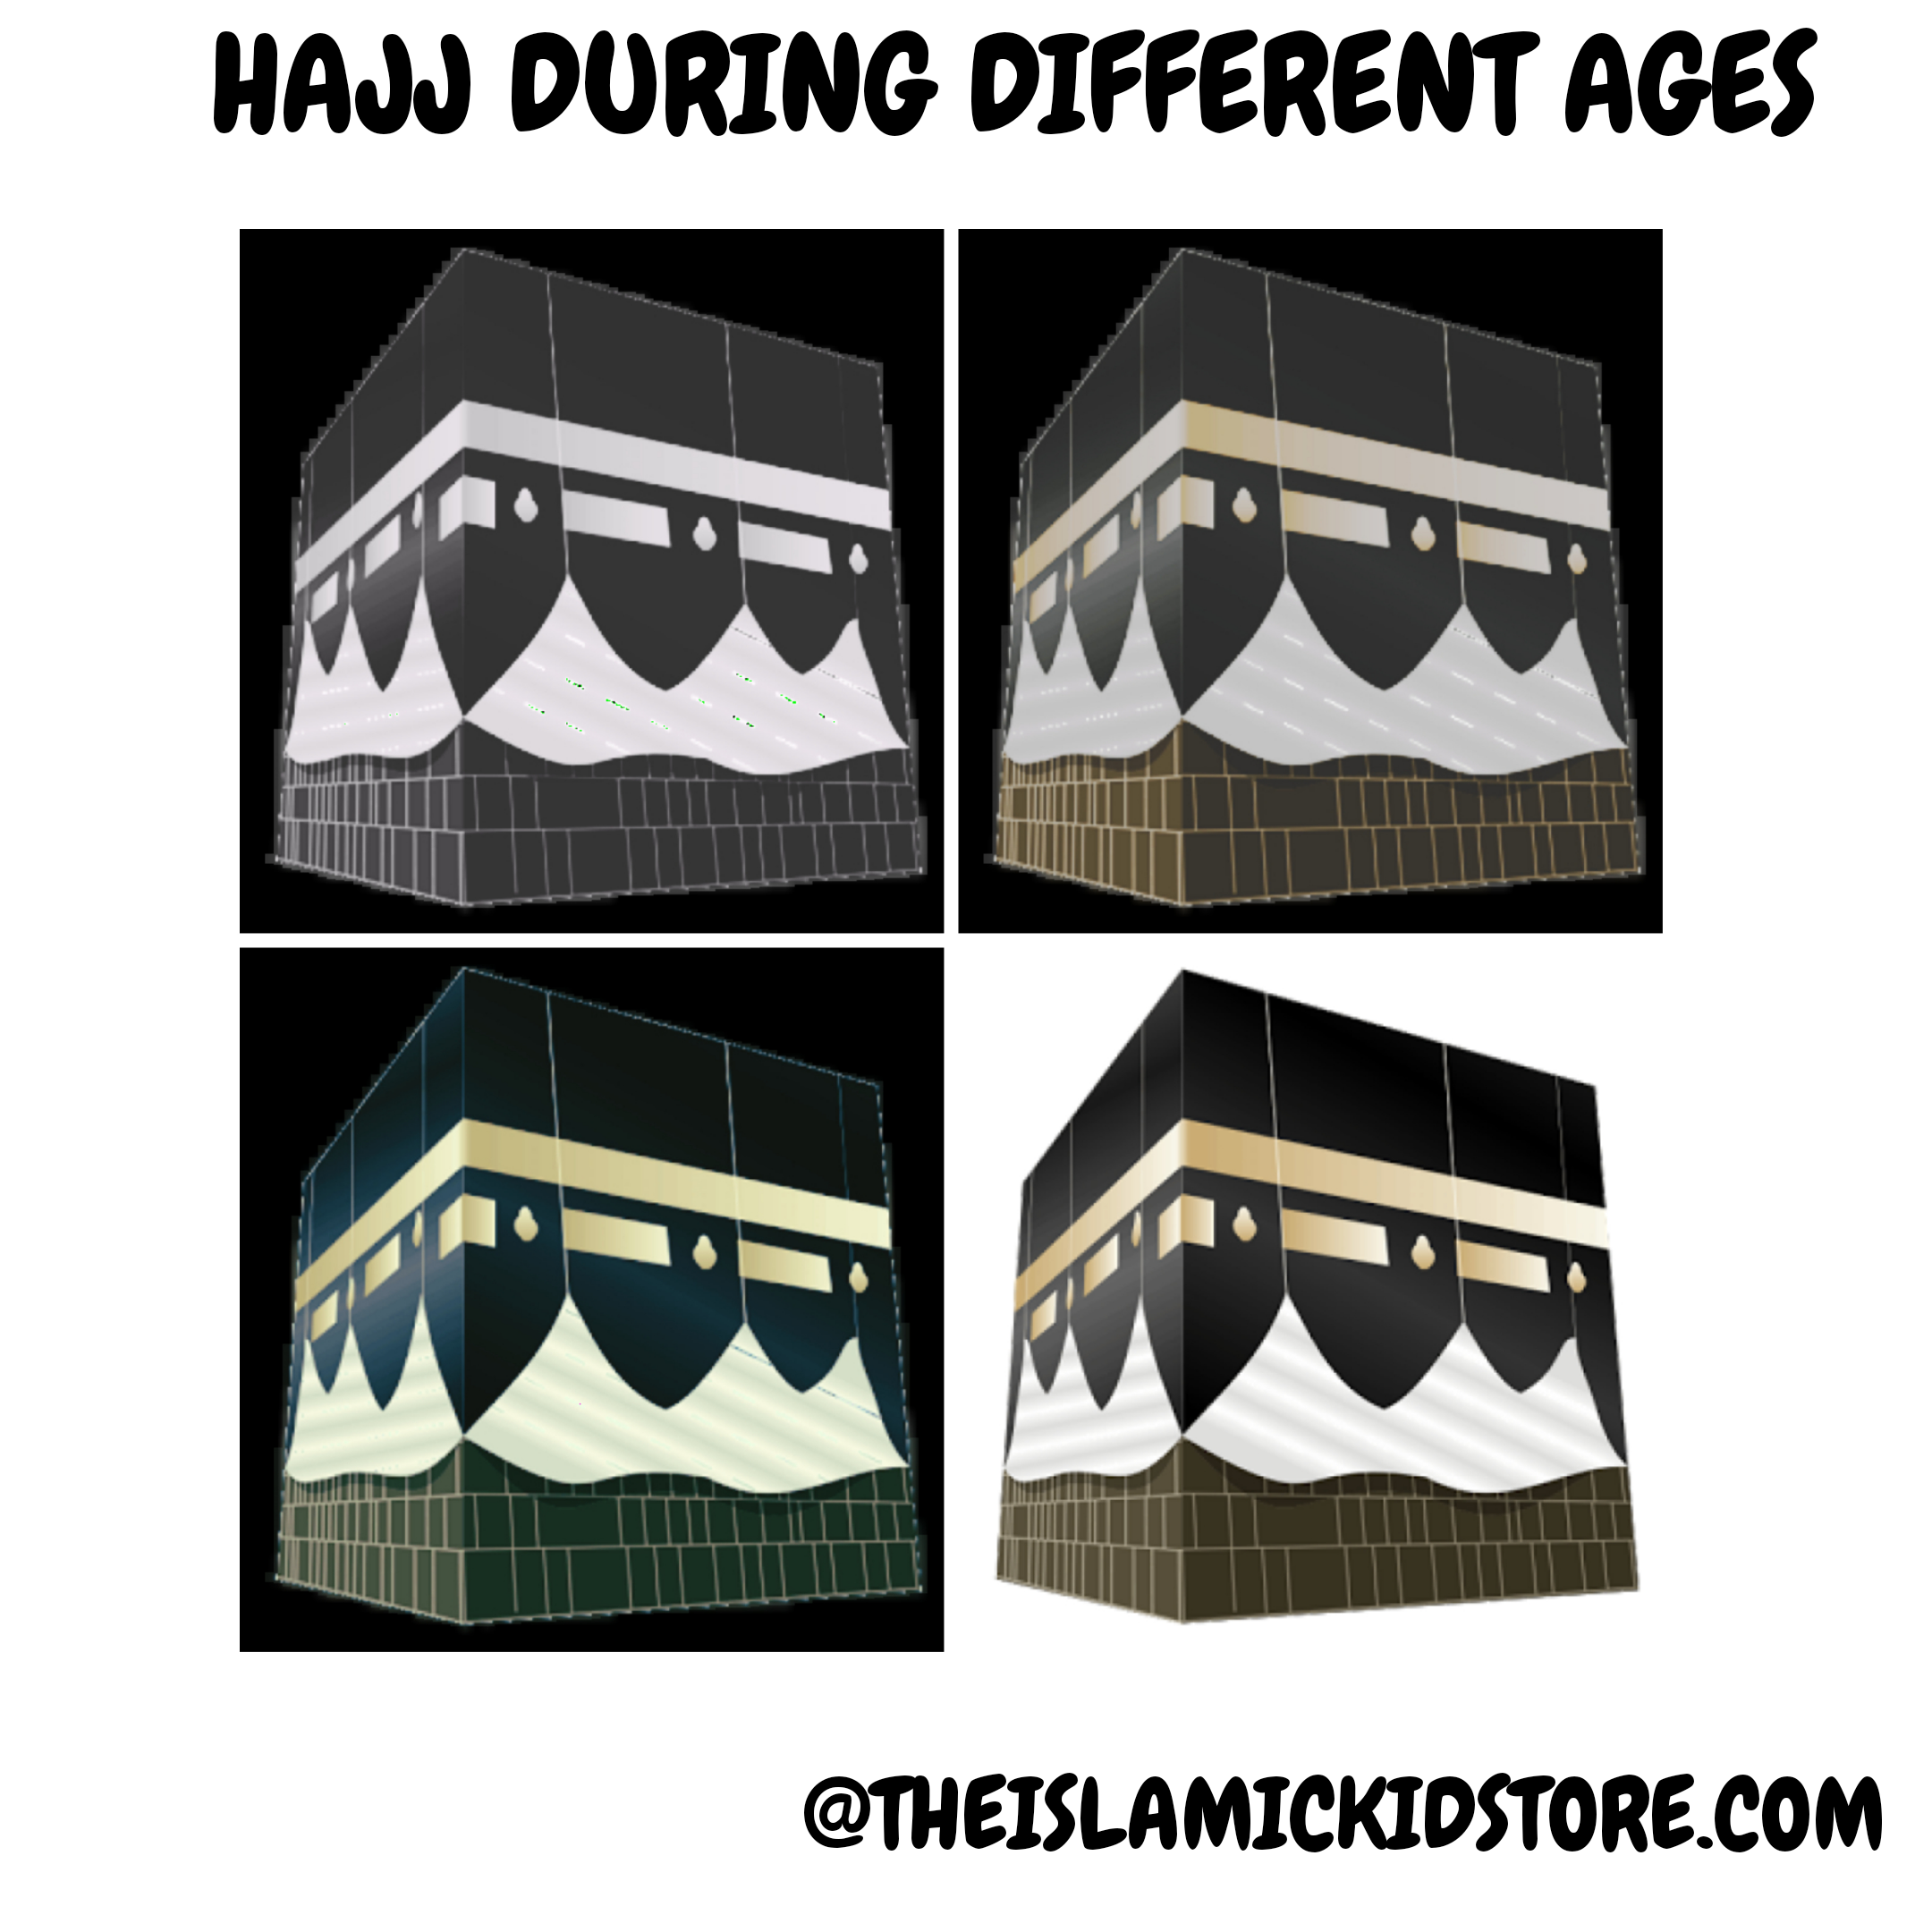 Hajj through different ages ( During era of Prophet Ibrahim, Pre Islamic Arabia , Prophet Muhammad and Modern times)